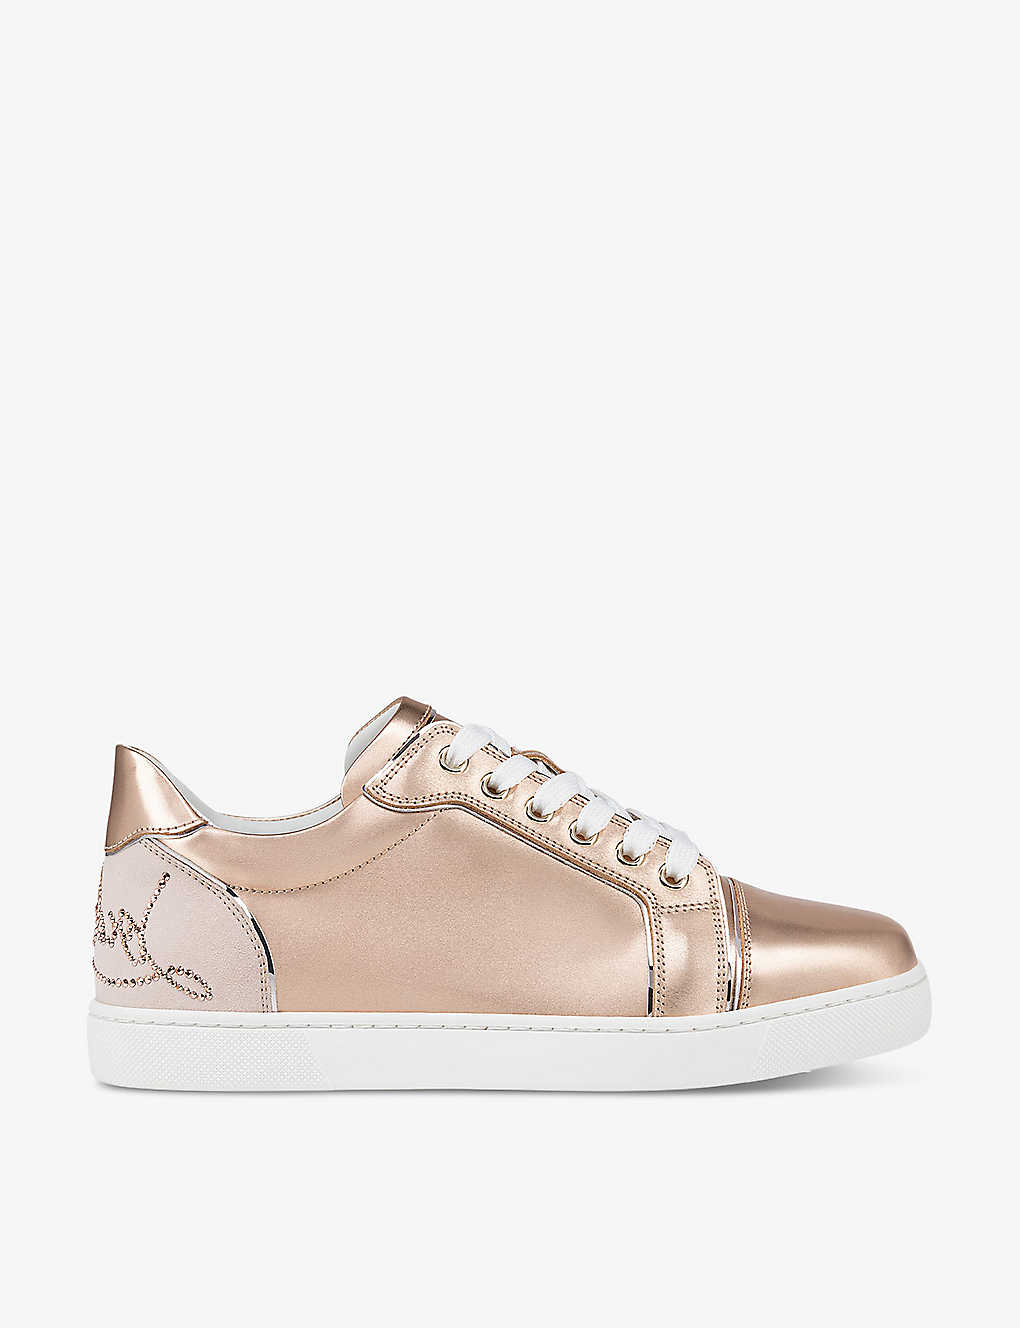 Christian Louboutin Womens Leche Fun Vieira Crystal-embellished Metallic-leather And Suede Low-top T In Cream